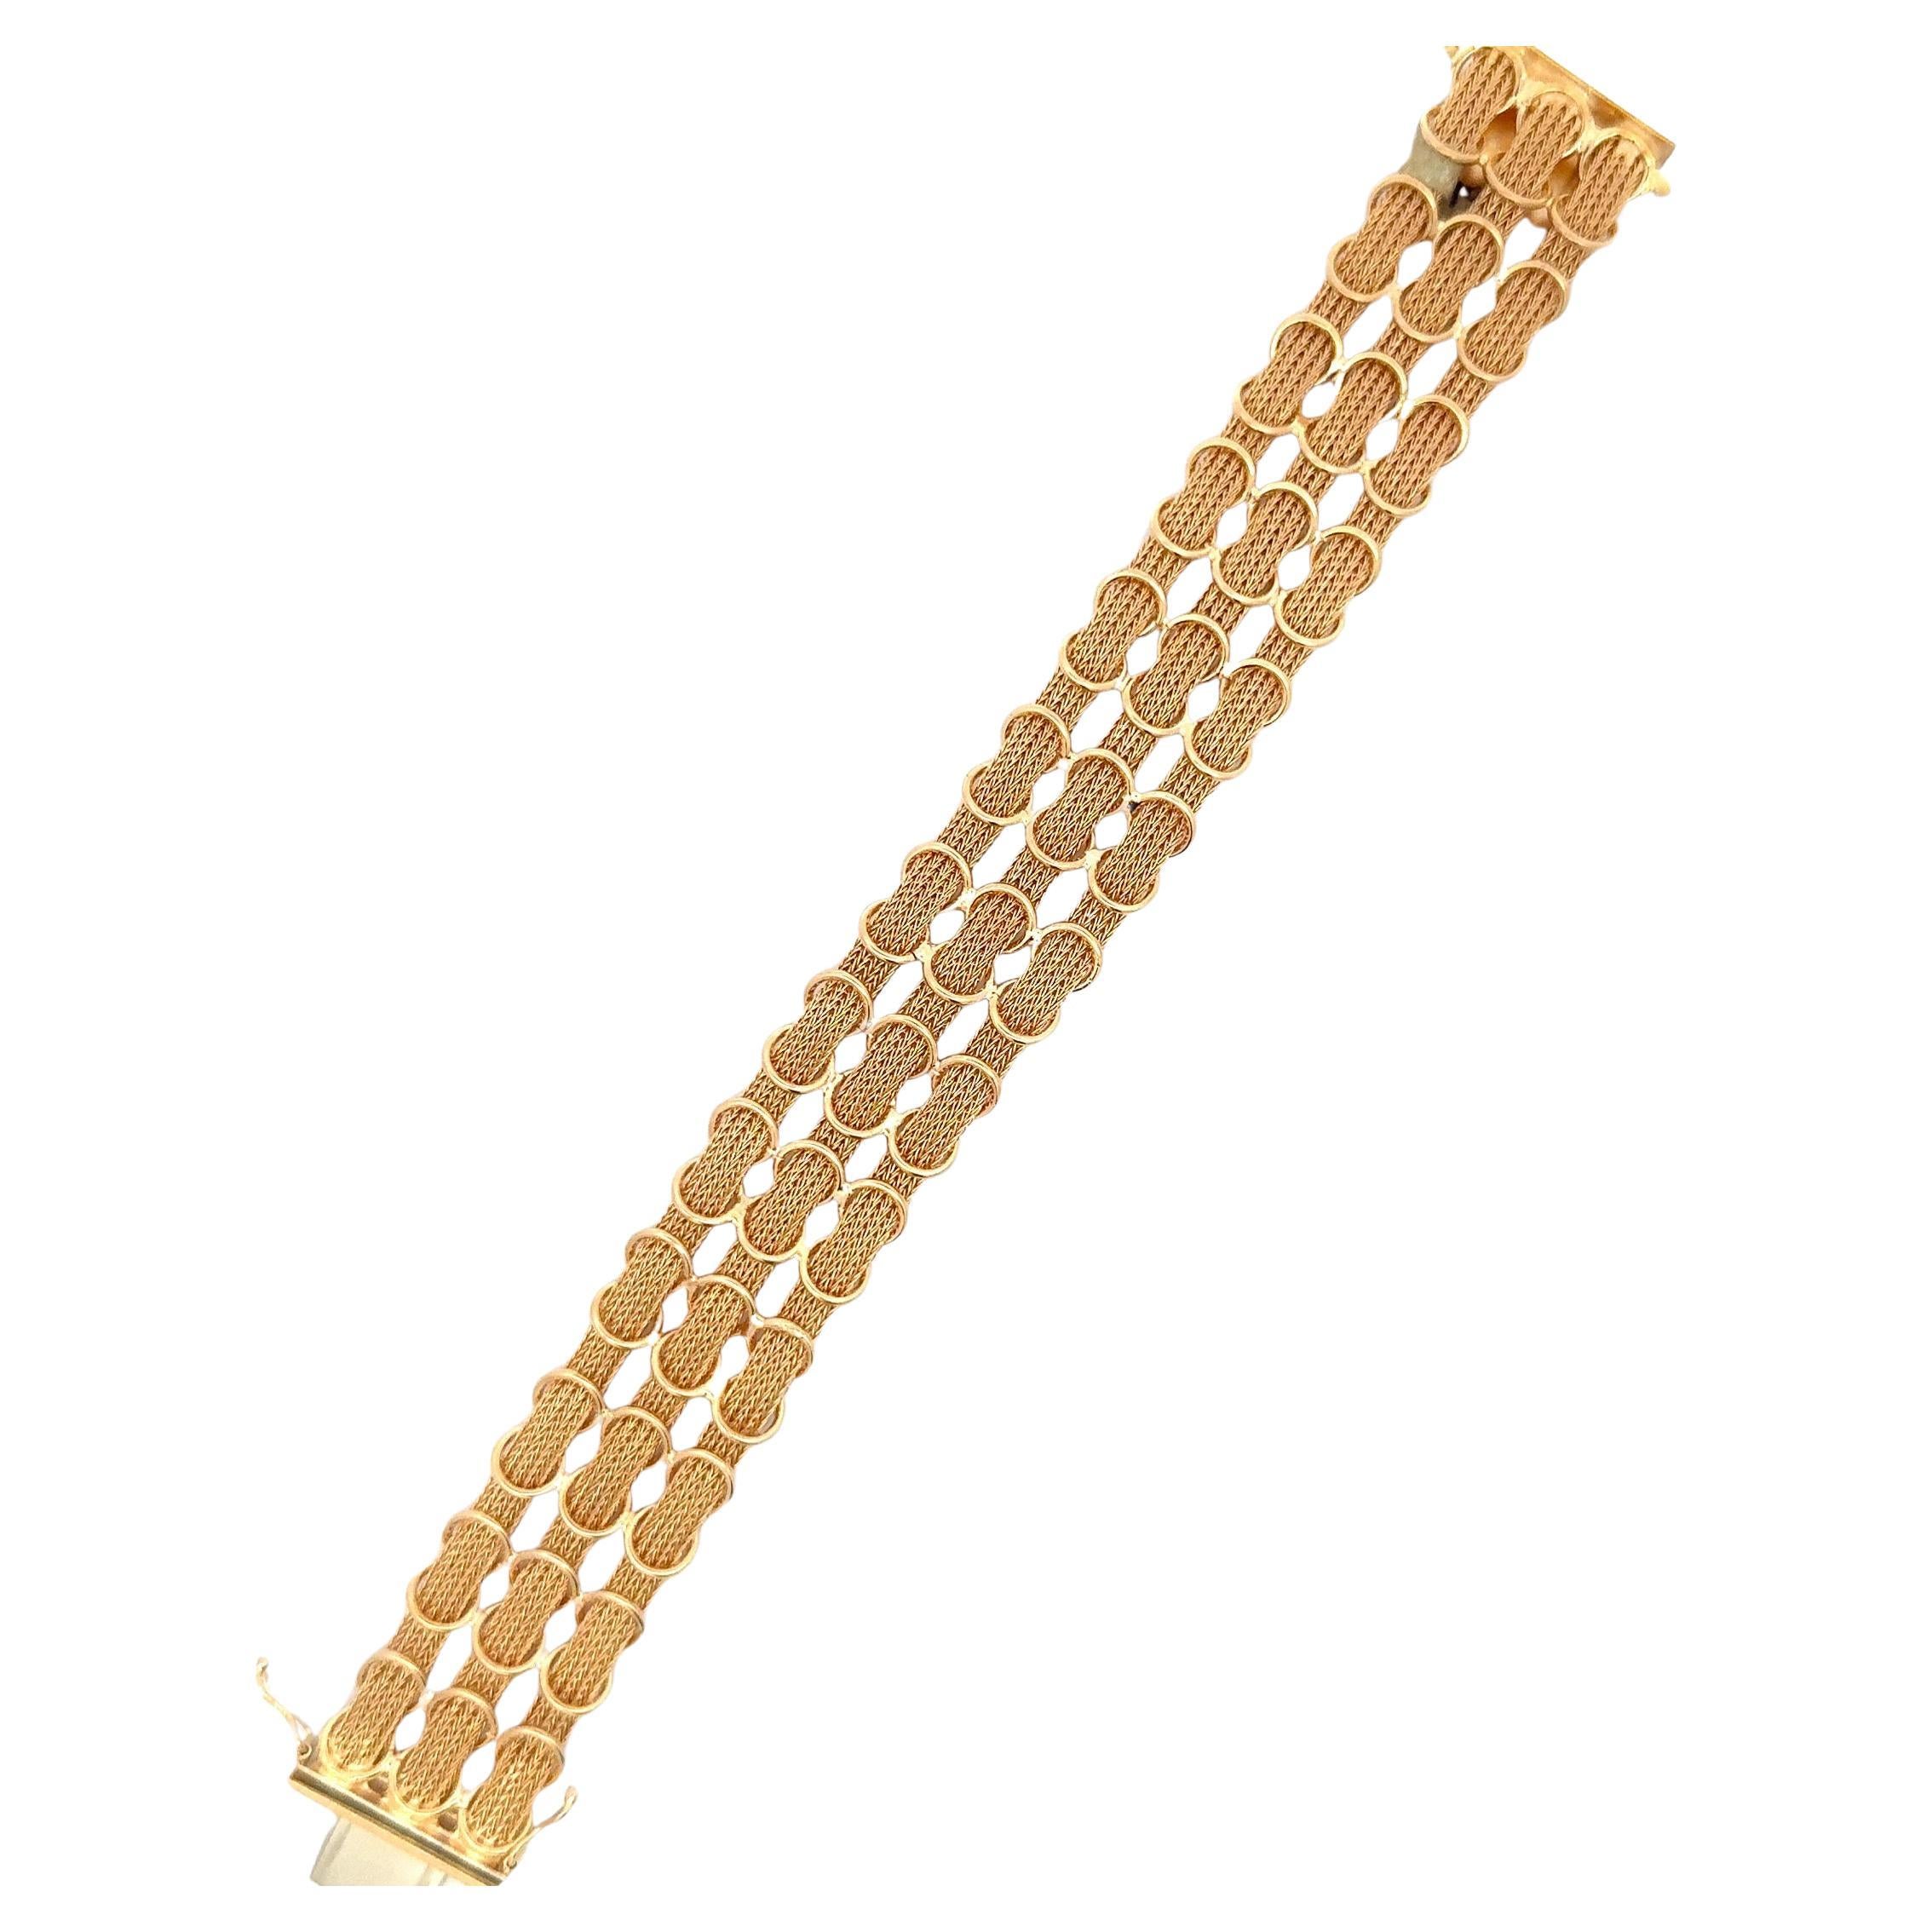 Three Row Woven Net Motif Bracelet 41.2 Grams 18 Karat Yellow Gold In Excellent Condition For Sale In New York, NY